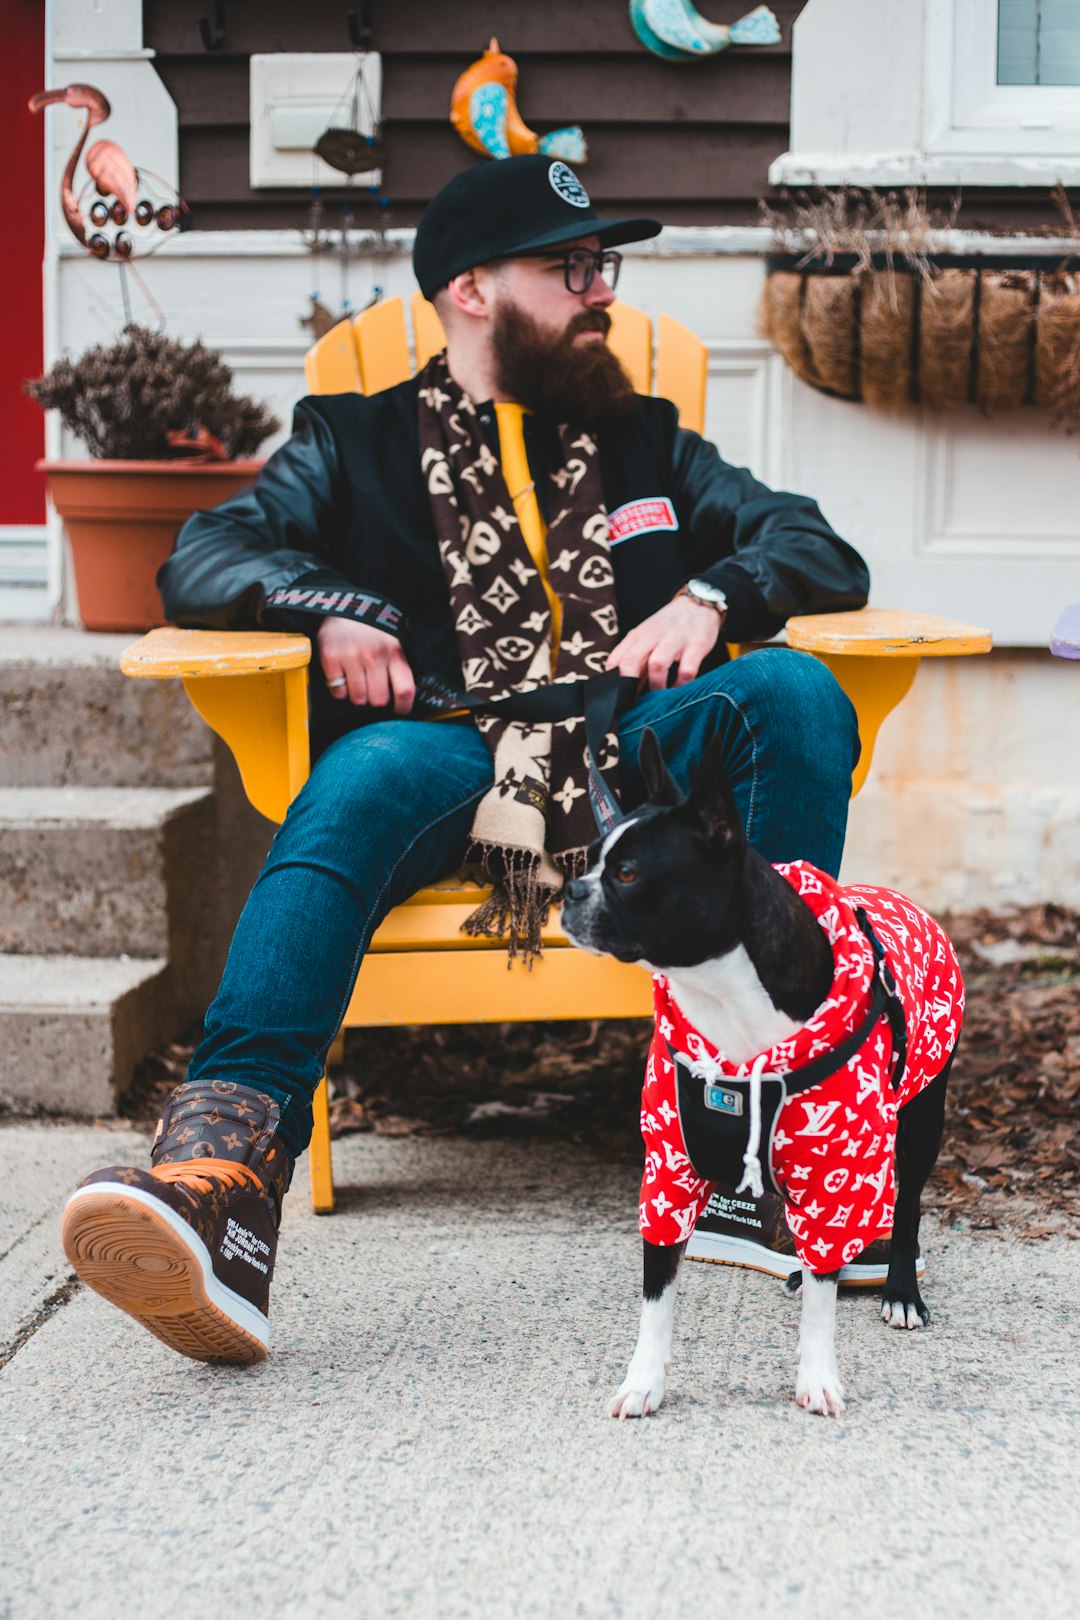 black and white short coated dog wearing red and white scarf sitting on yellow plastic chair